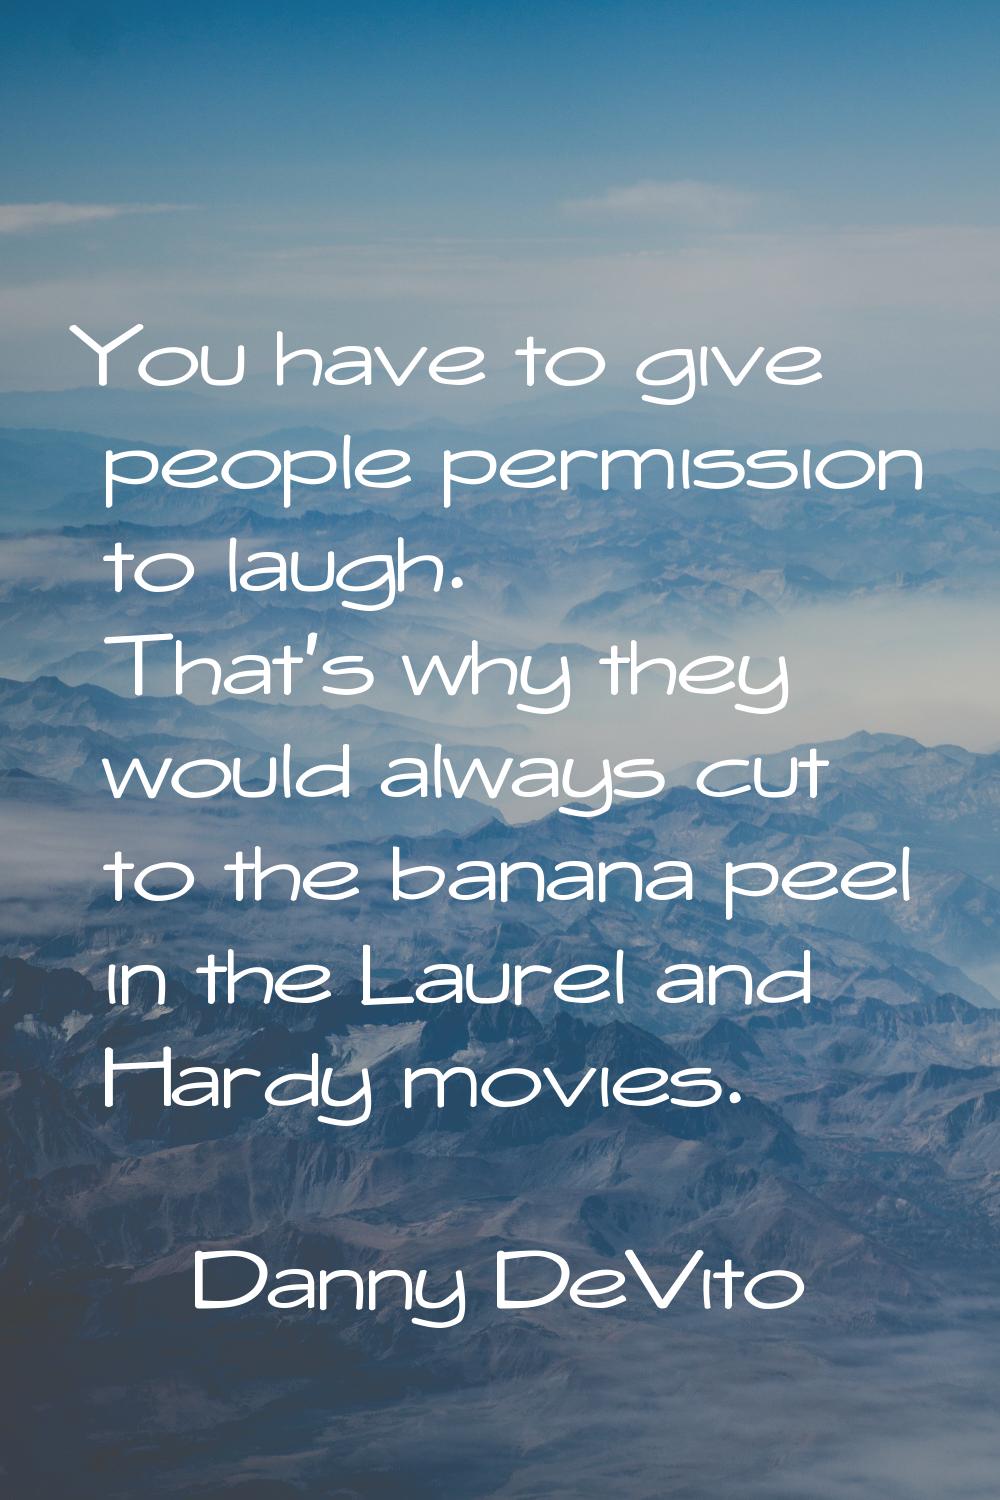 You have to give people permission to laugh. That's why they would always cut to the banana peel in